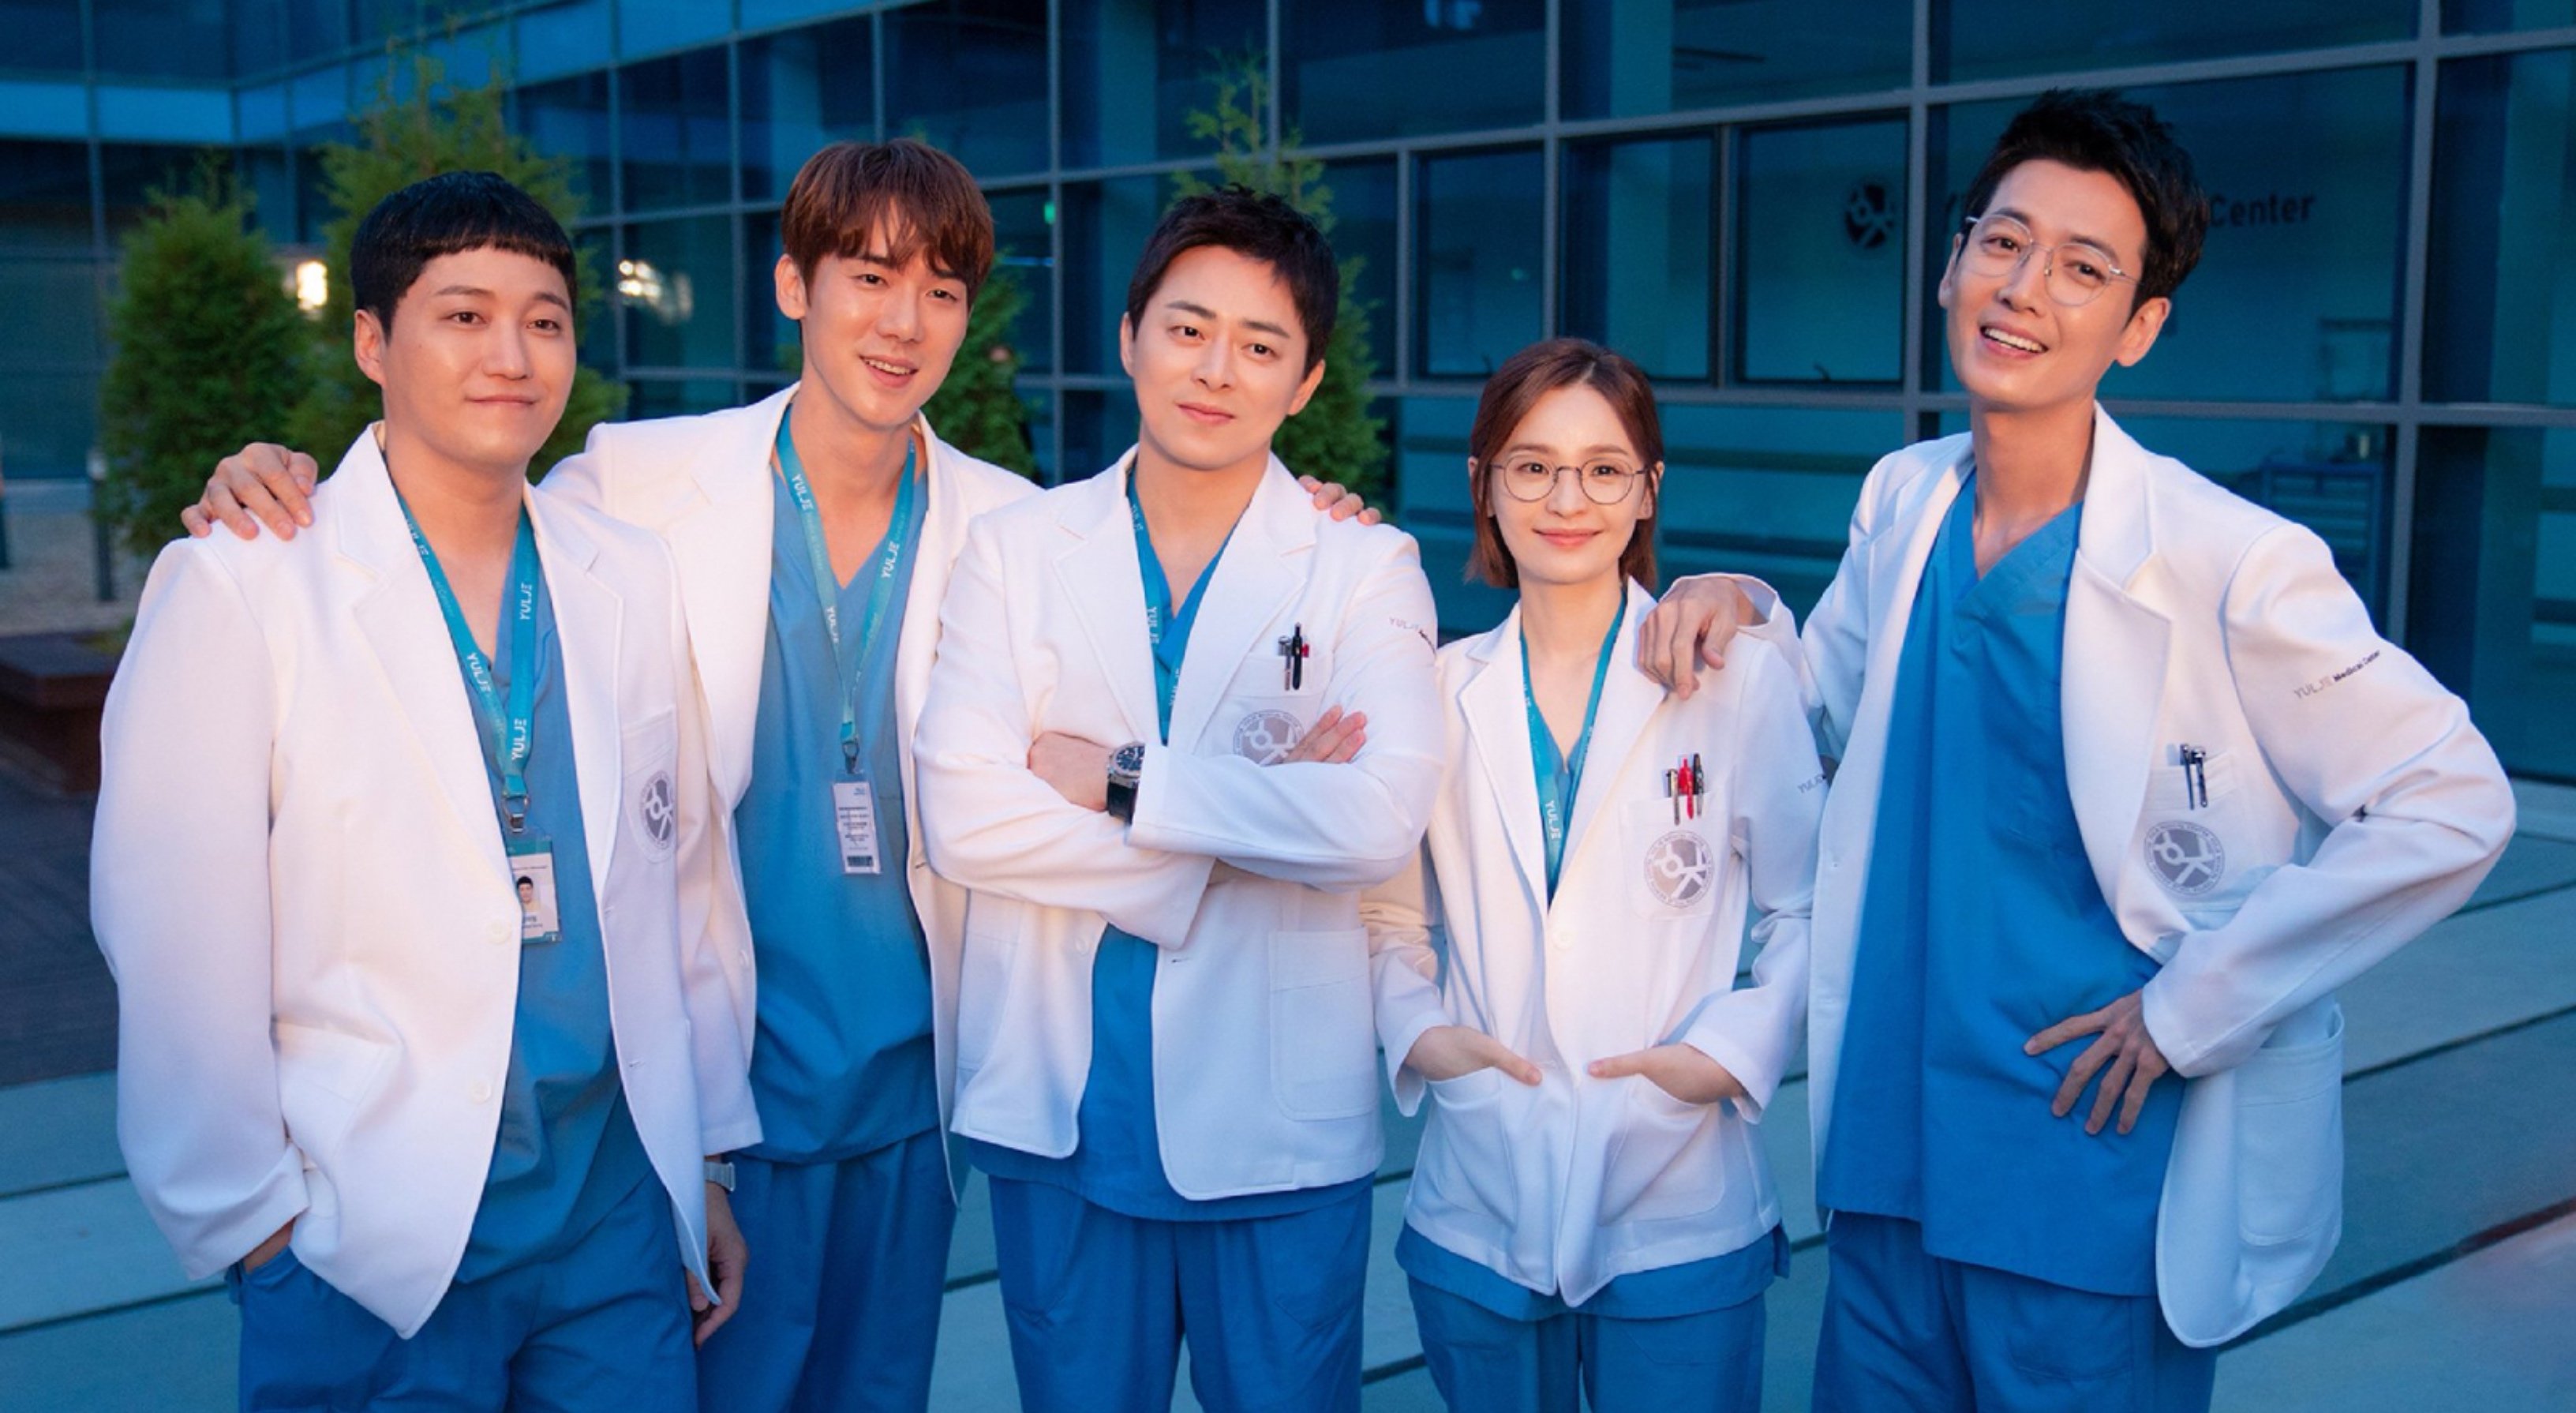 Main characters of 'Hospital Playlist 2' promo poster wearing scrubs in front of hospital